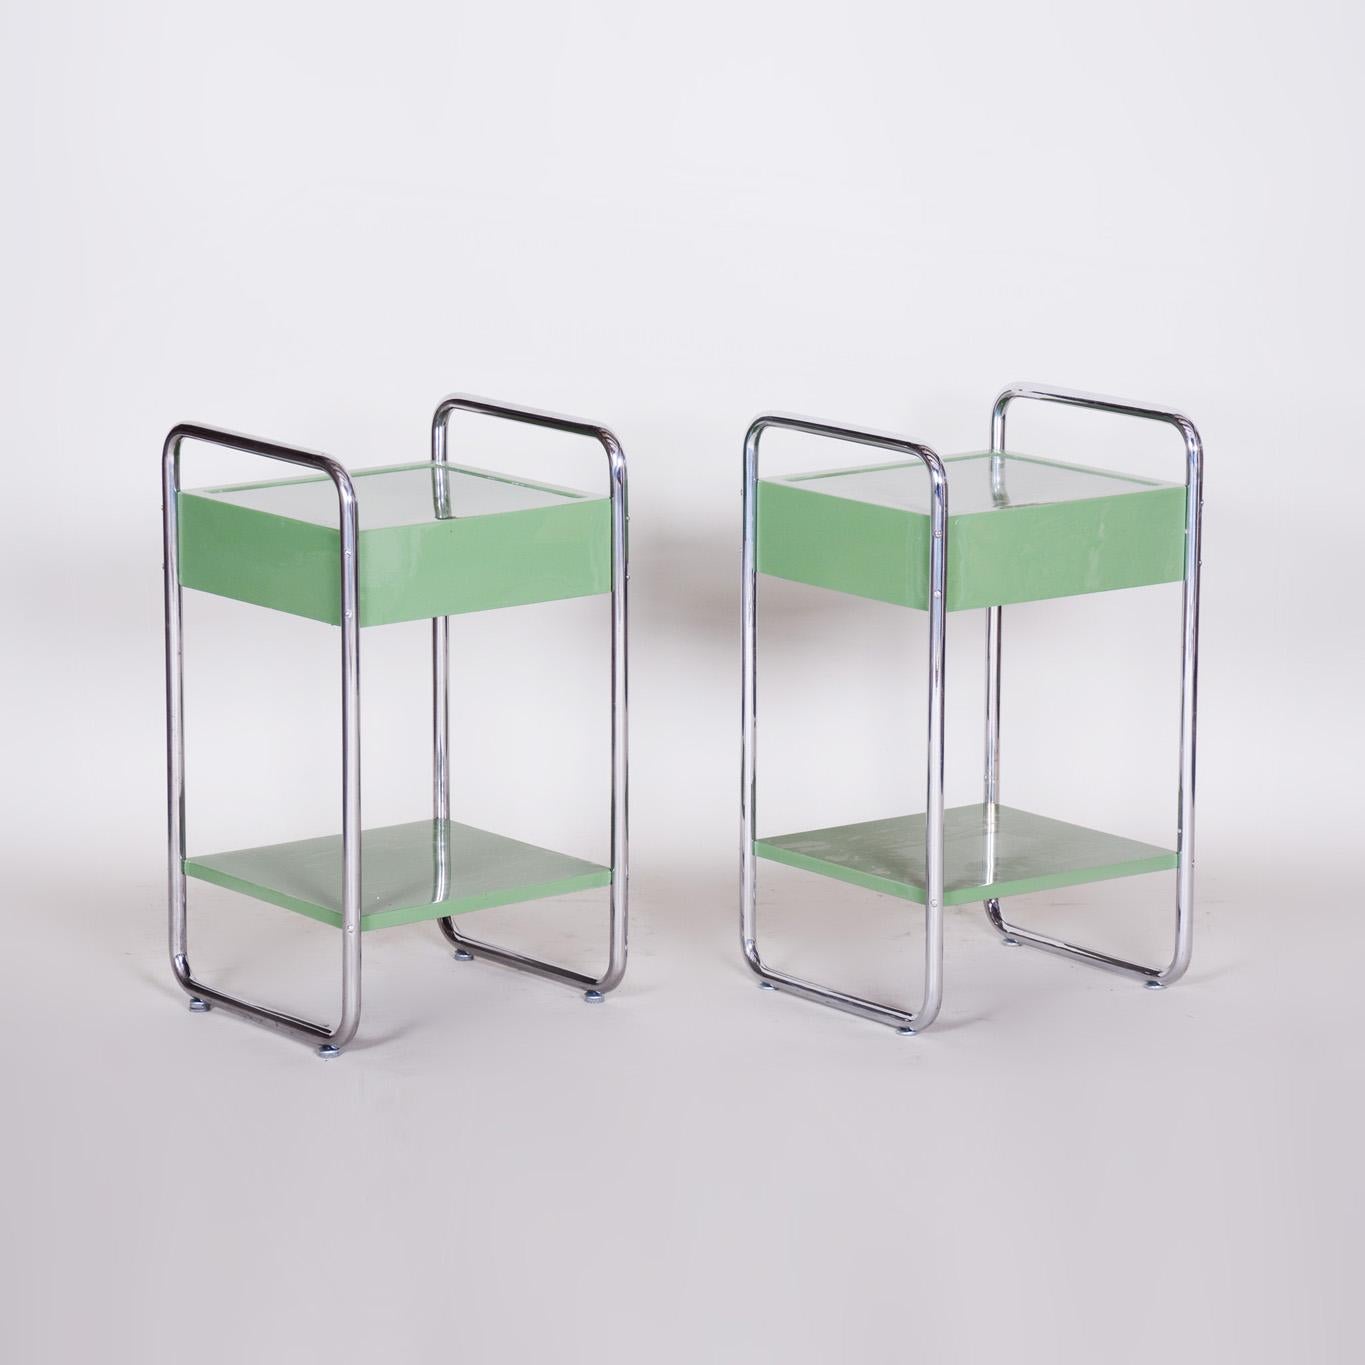 Restored Bauhaus Pair of Bed-Side Tables, Chrome-Plated Steel, Czech, 1930s For Sale 4